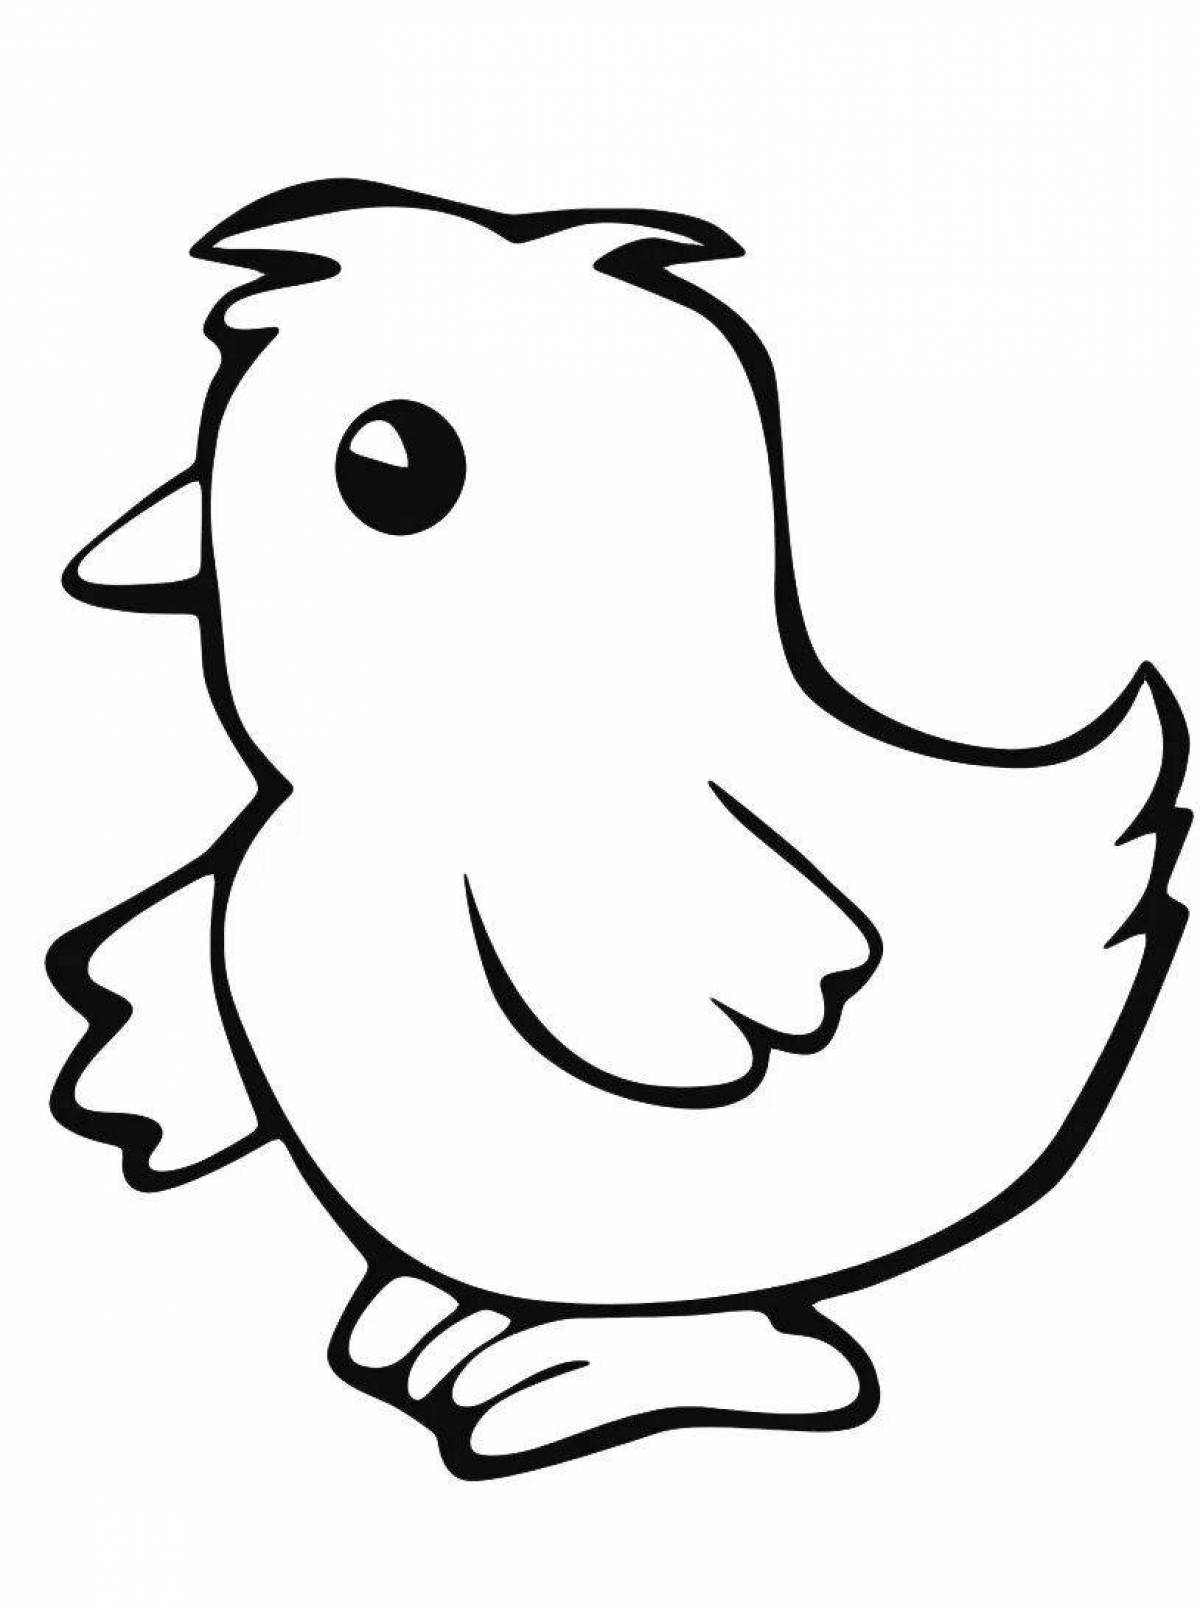 Coloring book sparkling chick for kids